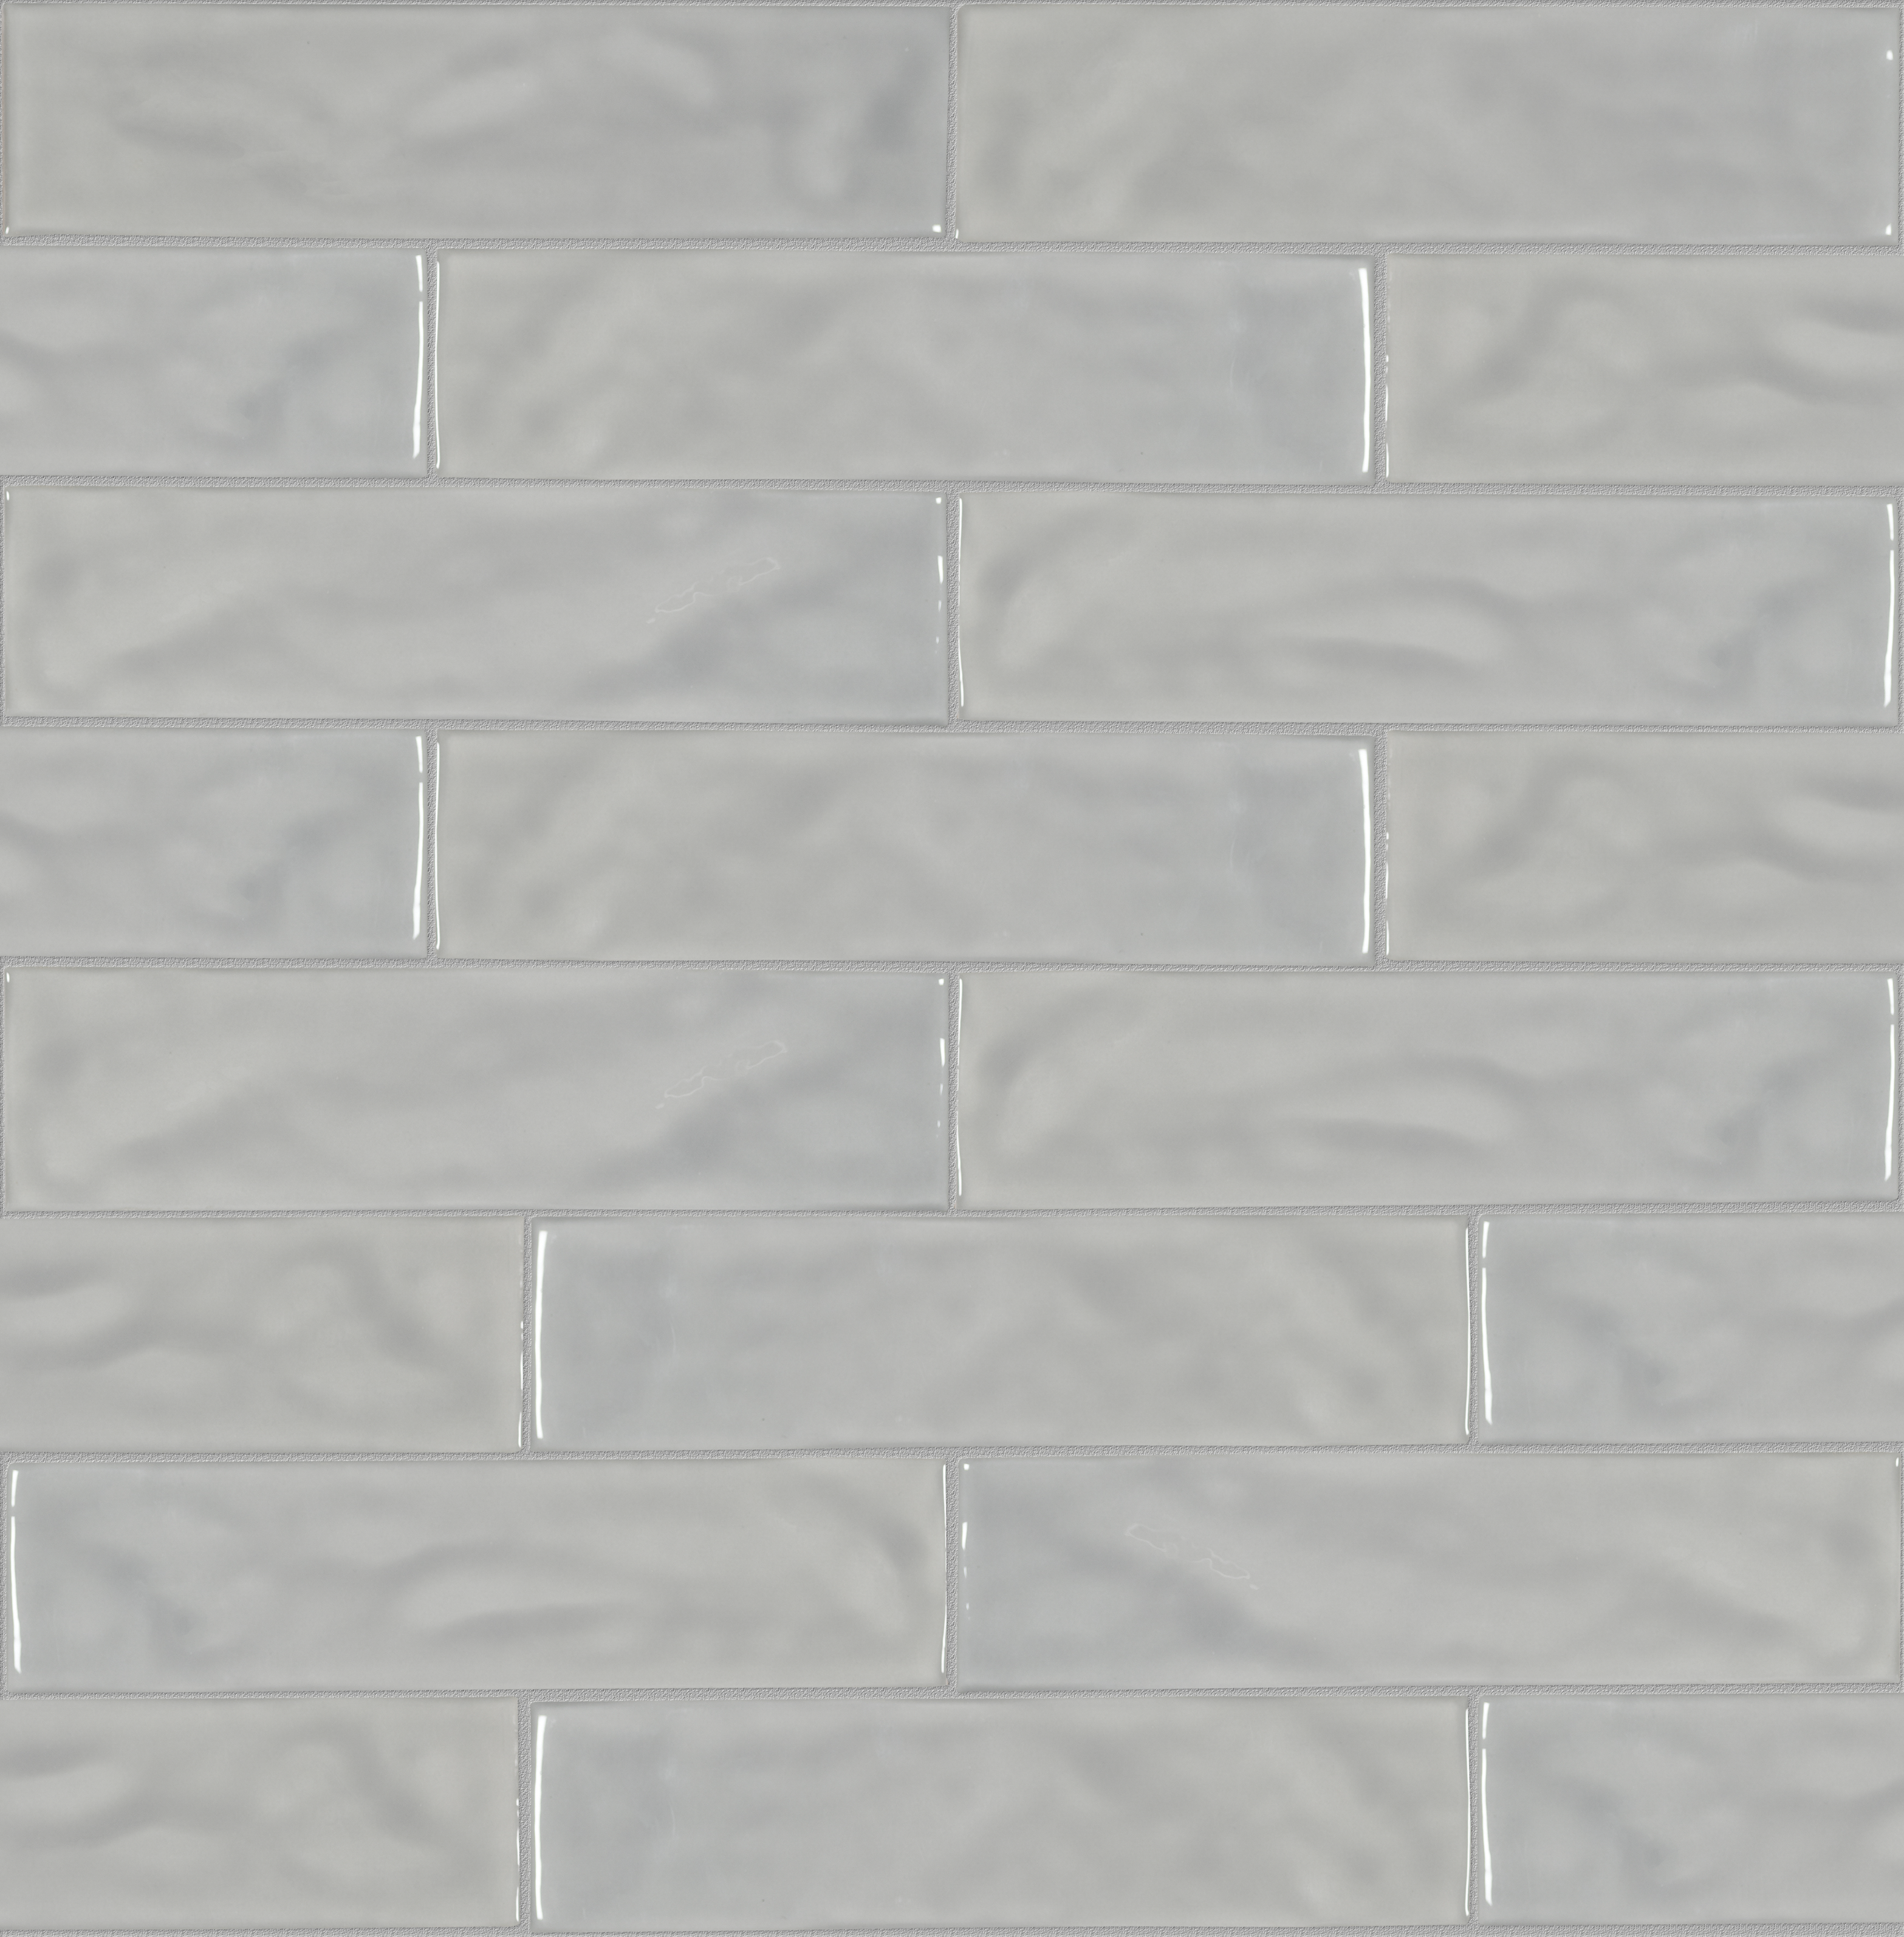 smoke pattern glazed ceramic field tile from marlow anatolia collection distributed by surface group international glossy finish pressed edge 3x12 rectangle shape